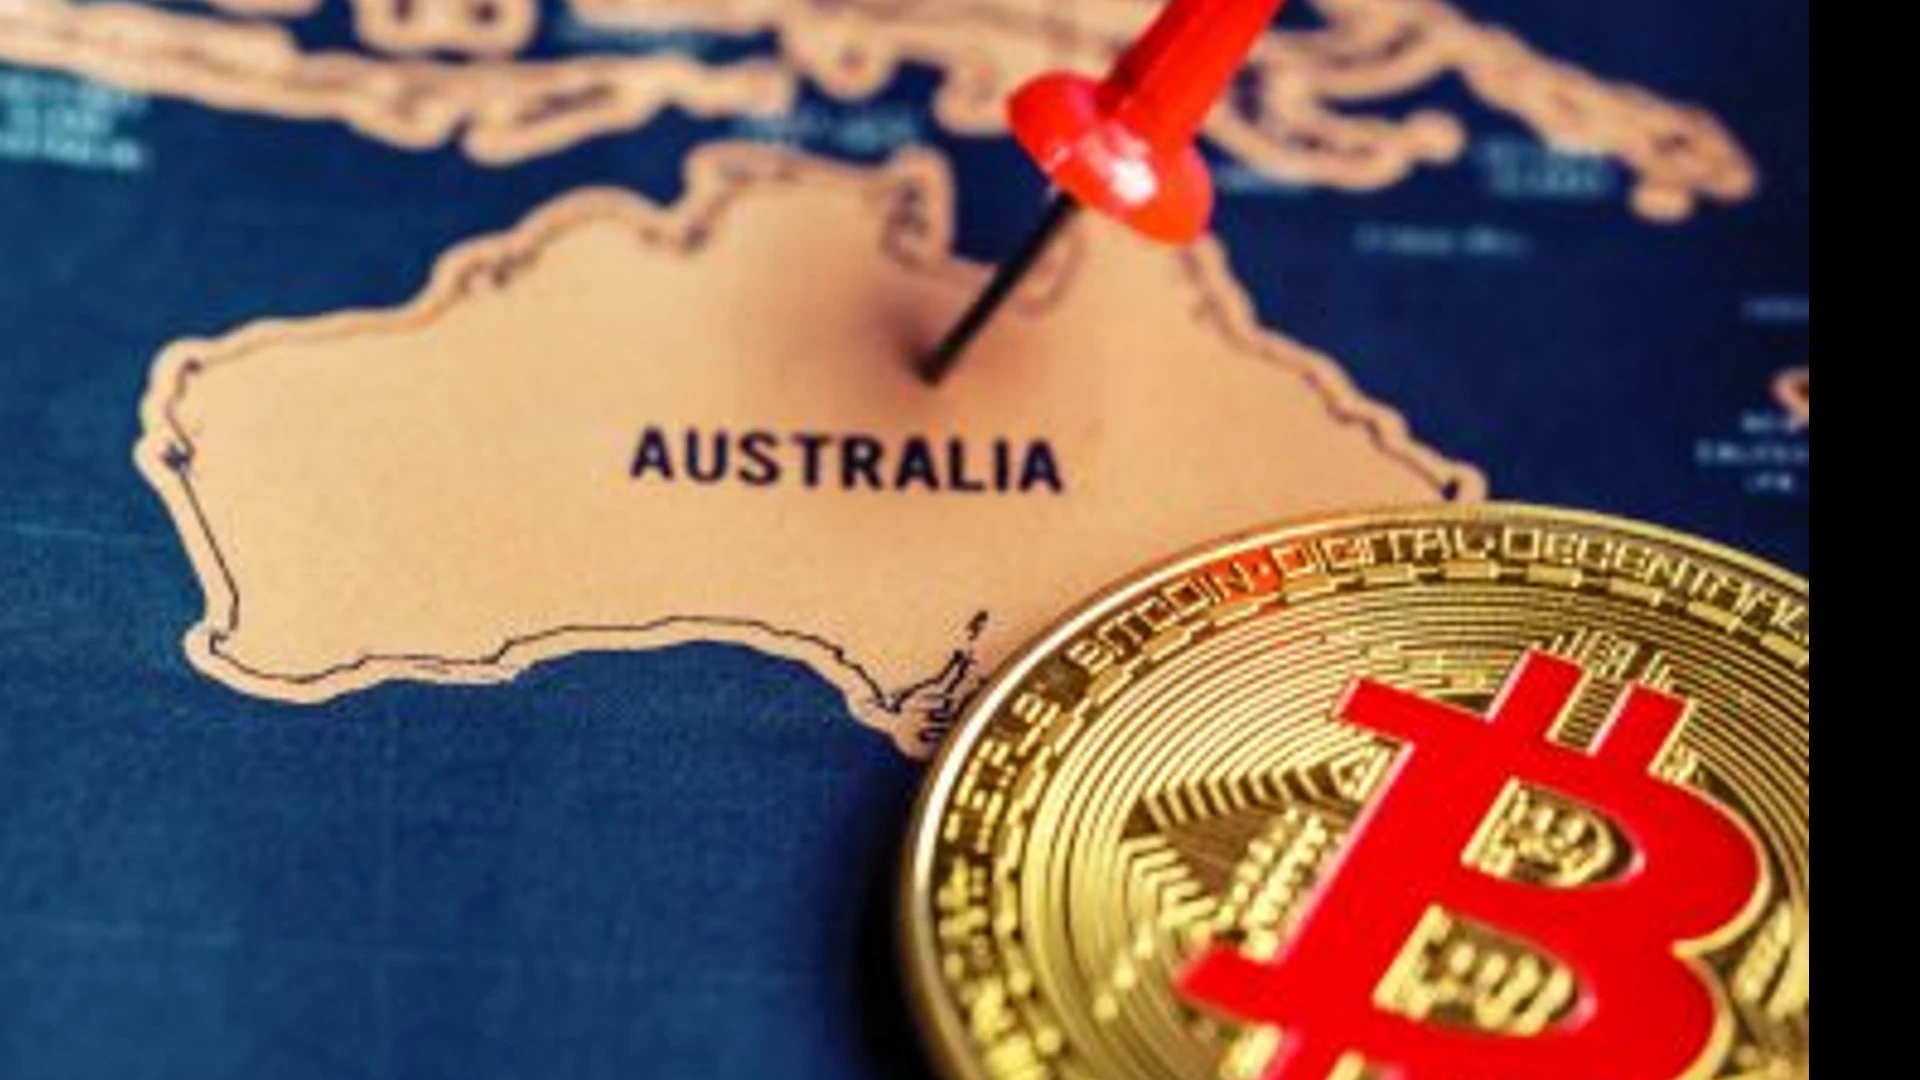 Commonwealth Bank To Enable Crypto Trading For 6.5 Million Australians, ‘Other Banks Will Follow’